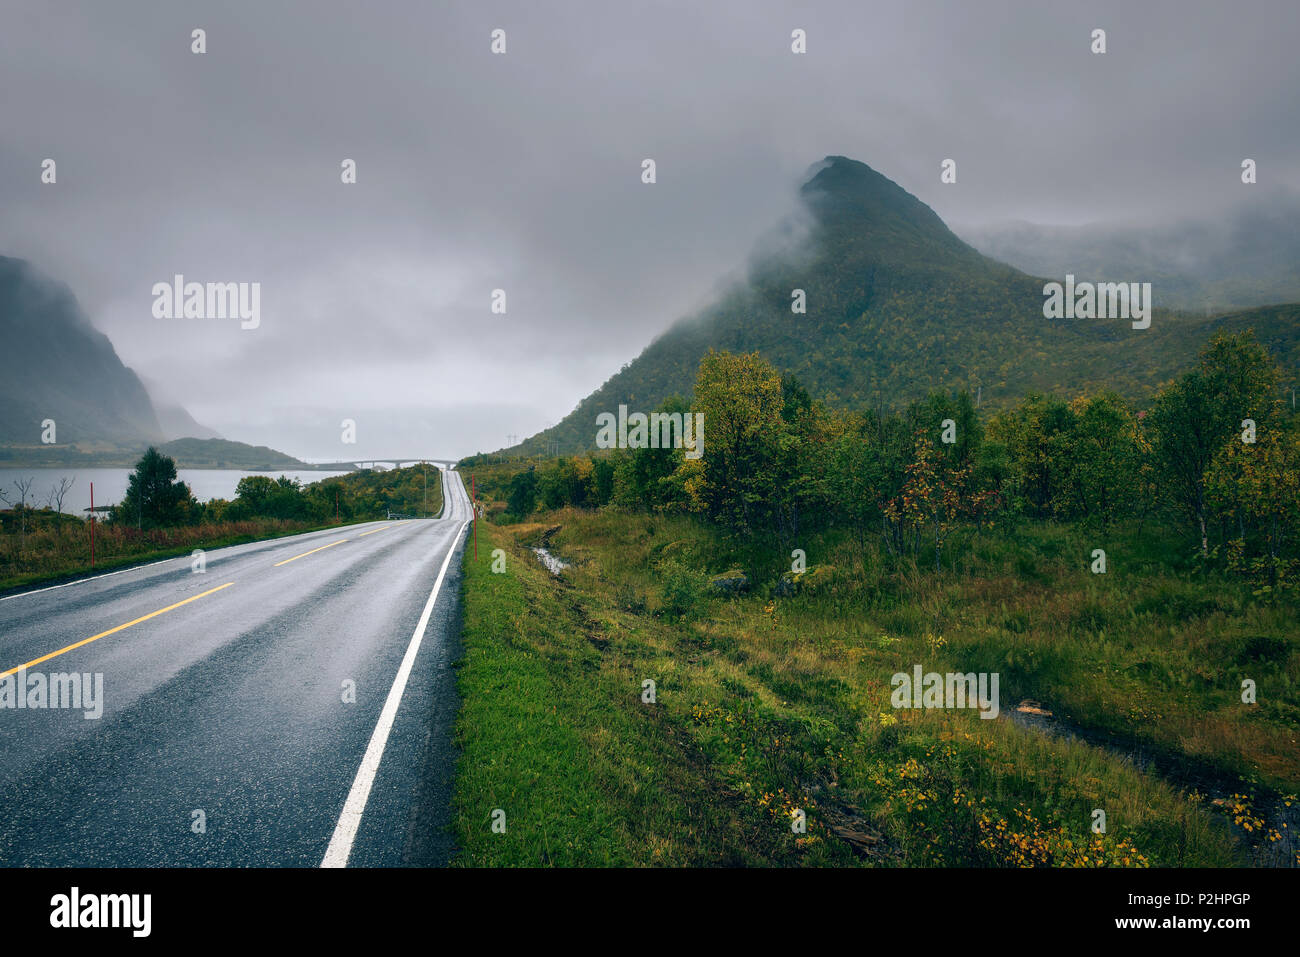 Scenic road along the coastline in Norway on a rainy and foggy day Stock Photo